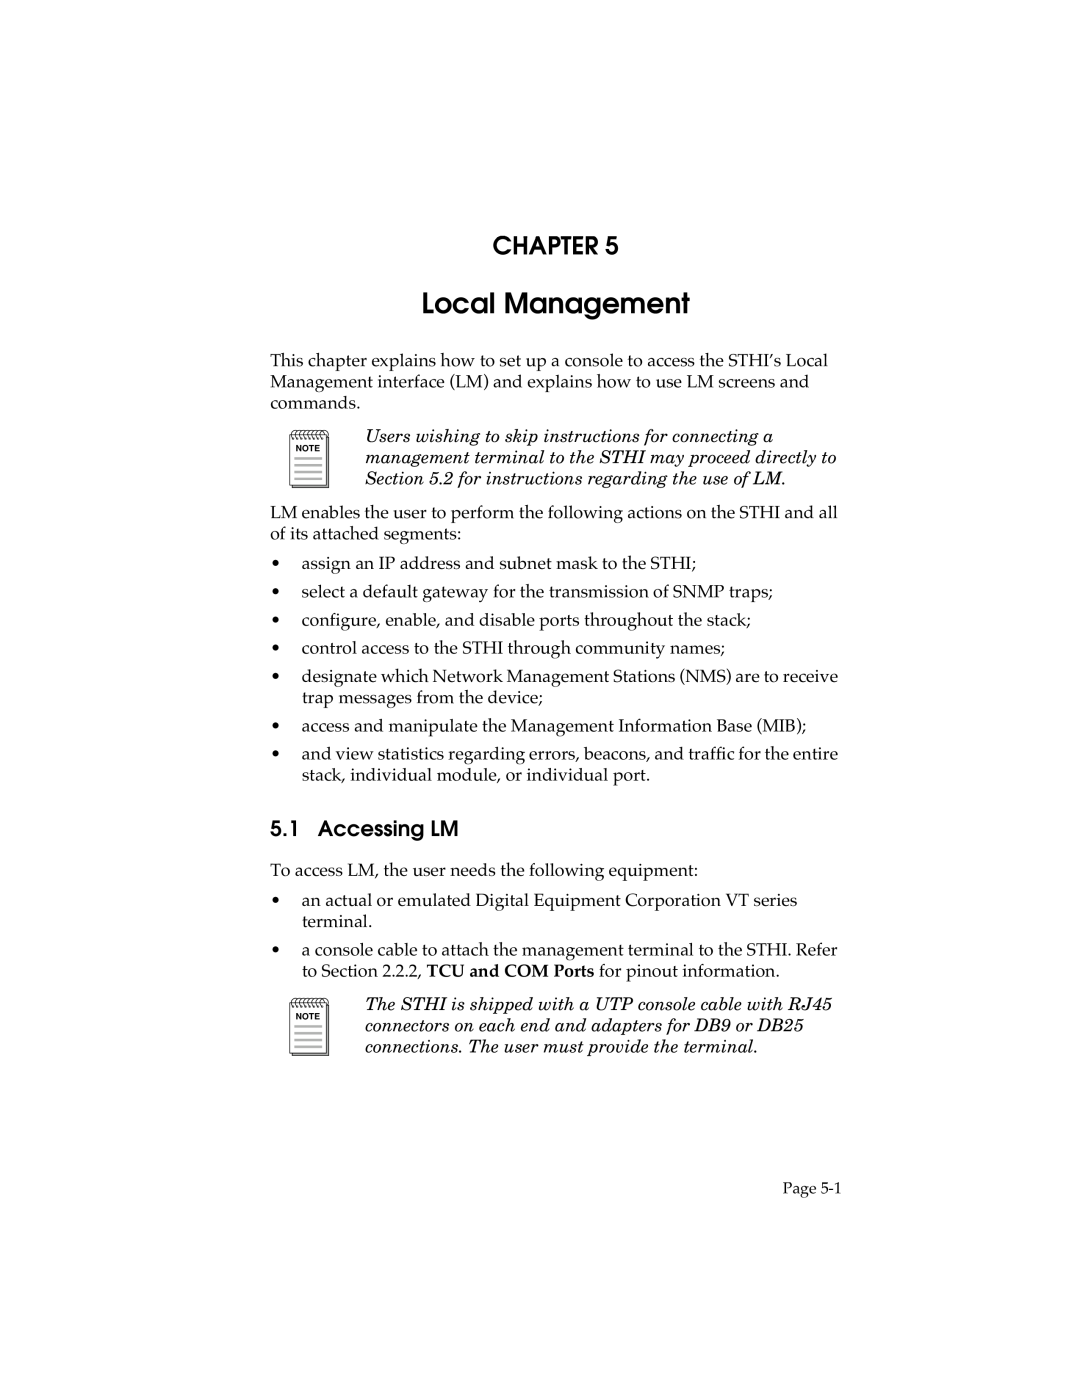 Cabletron Systems STHI manual Local Management, Accessing LM, Chapter 